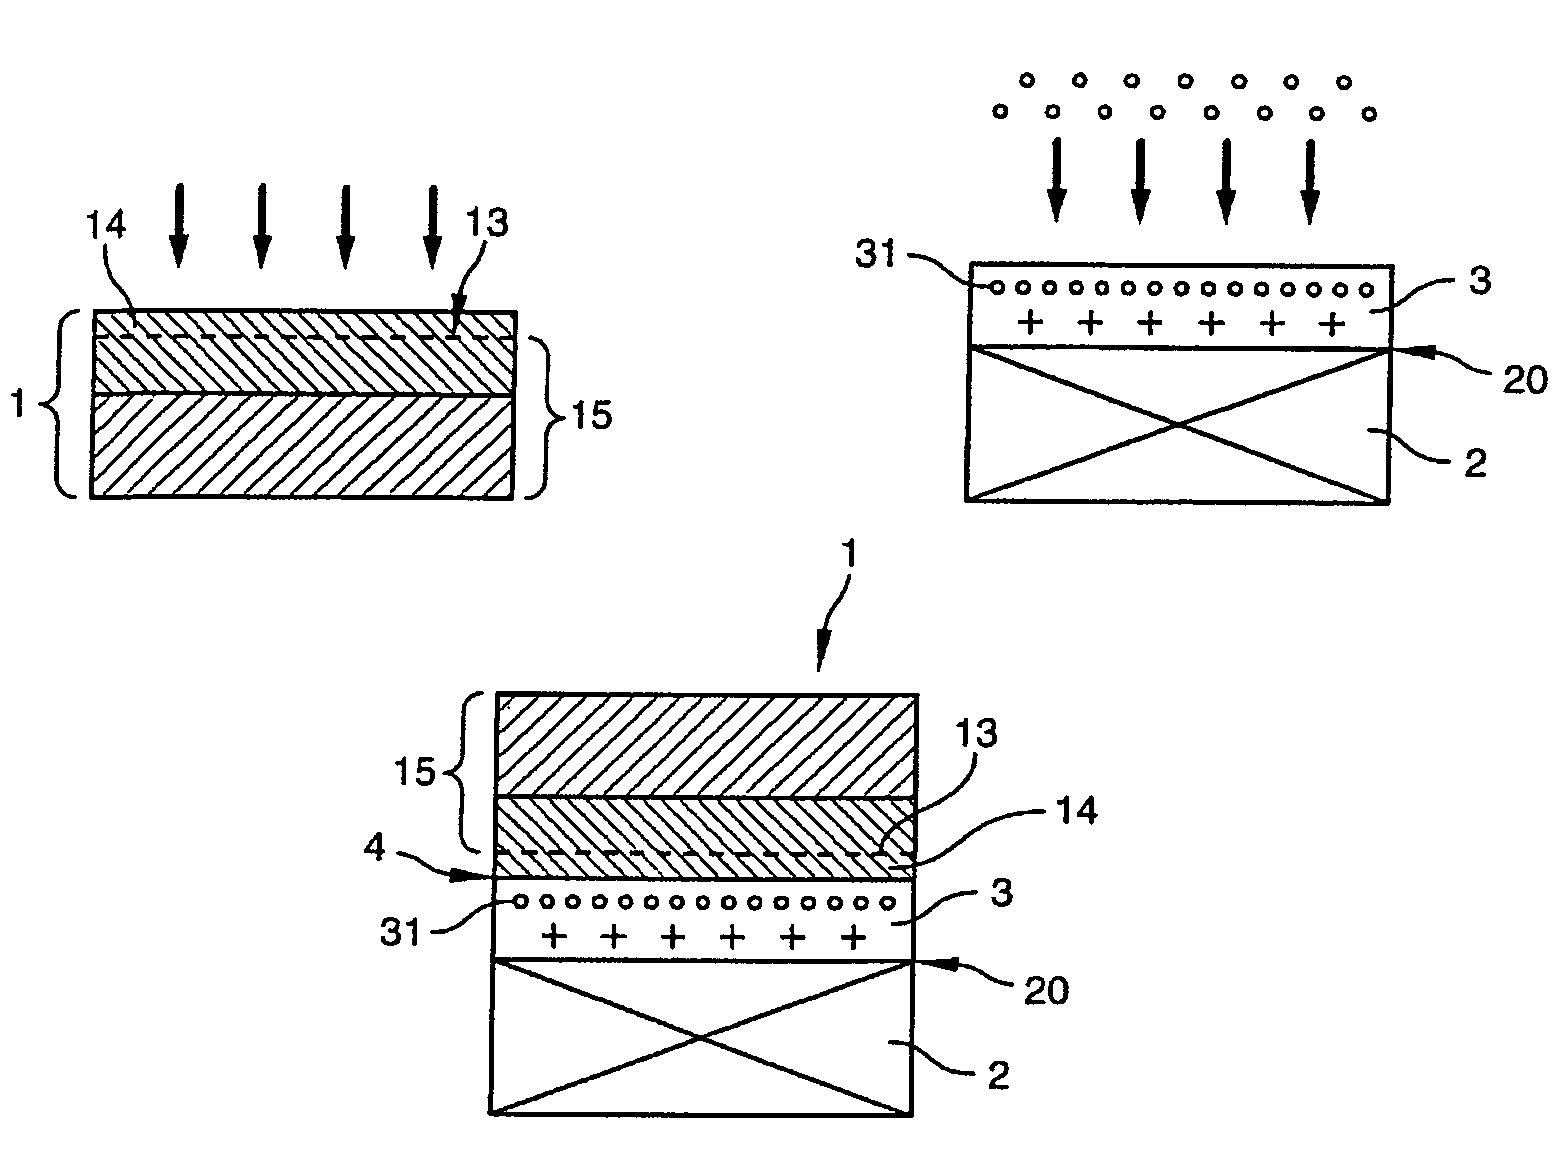 Semiconductor-on-insulator type heterostructure and method of fabrication